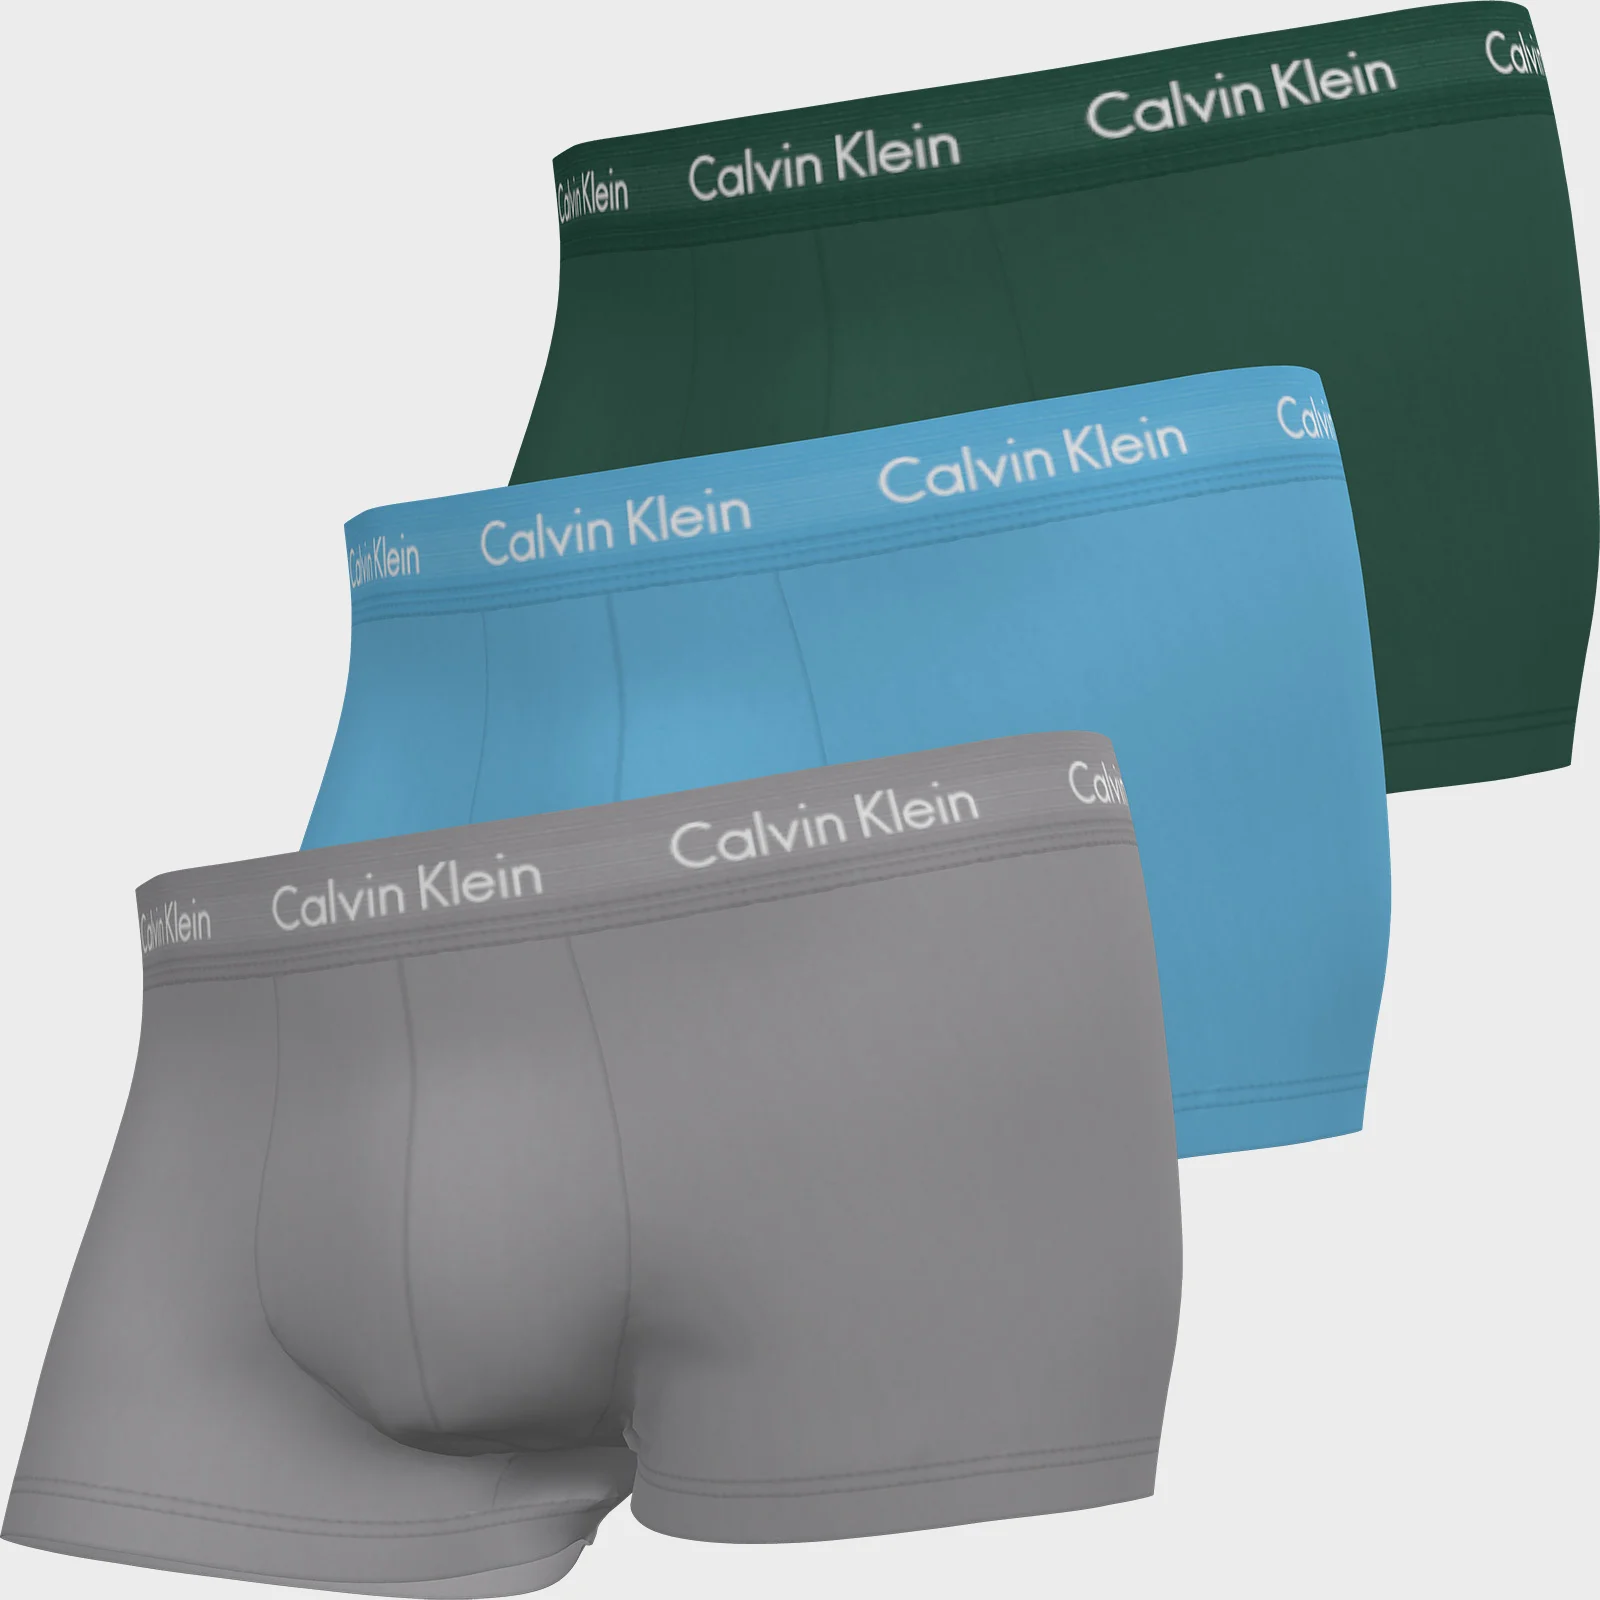 Calvin Klein Men's Cotton Stretch Low Rise 3 Pack Trunks with Contrast Waistband - Jade Sea/Sky High/Sleek Silver Image 1